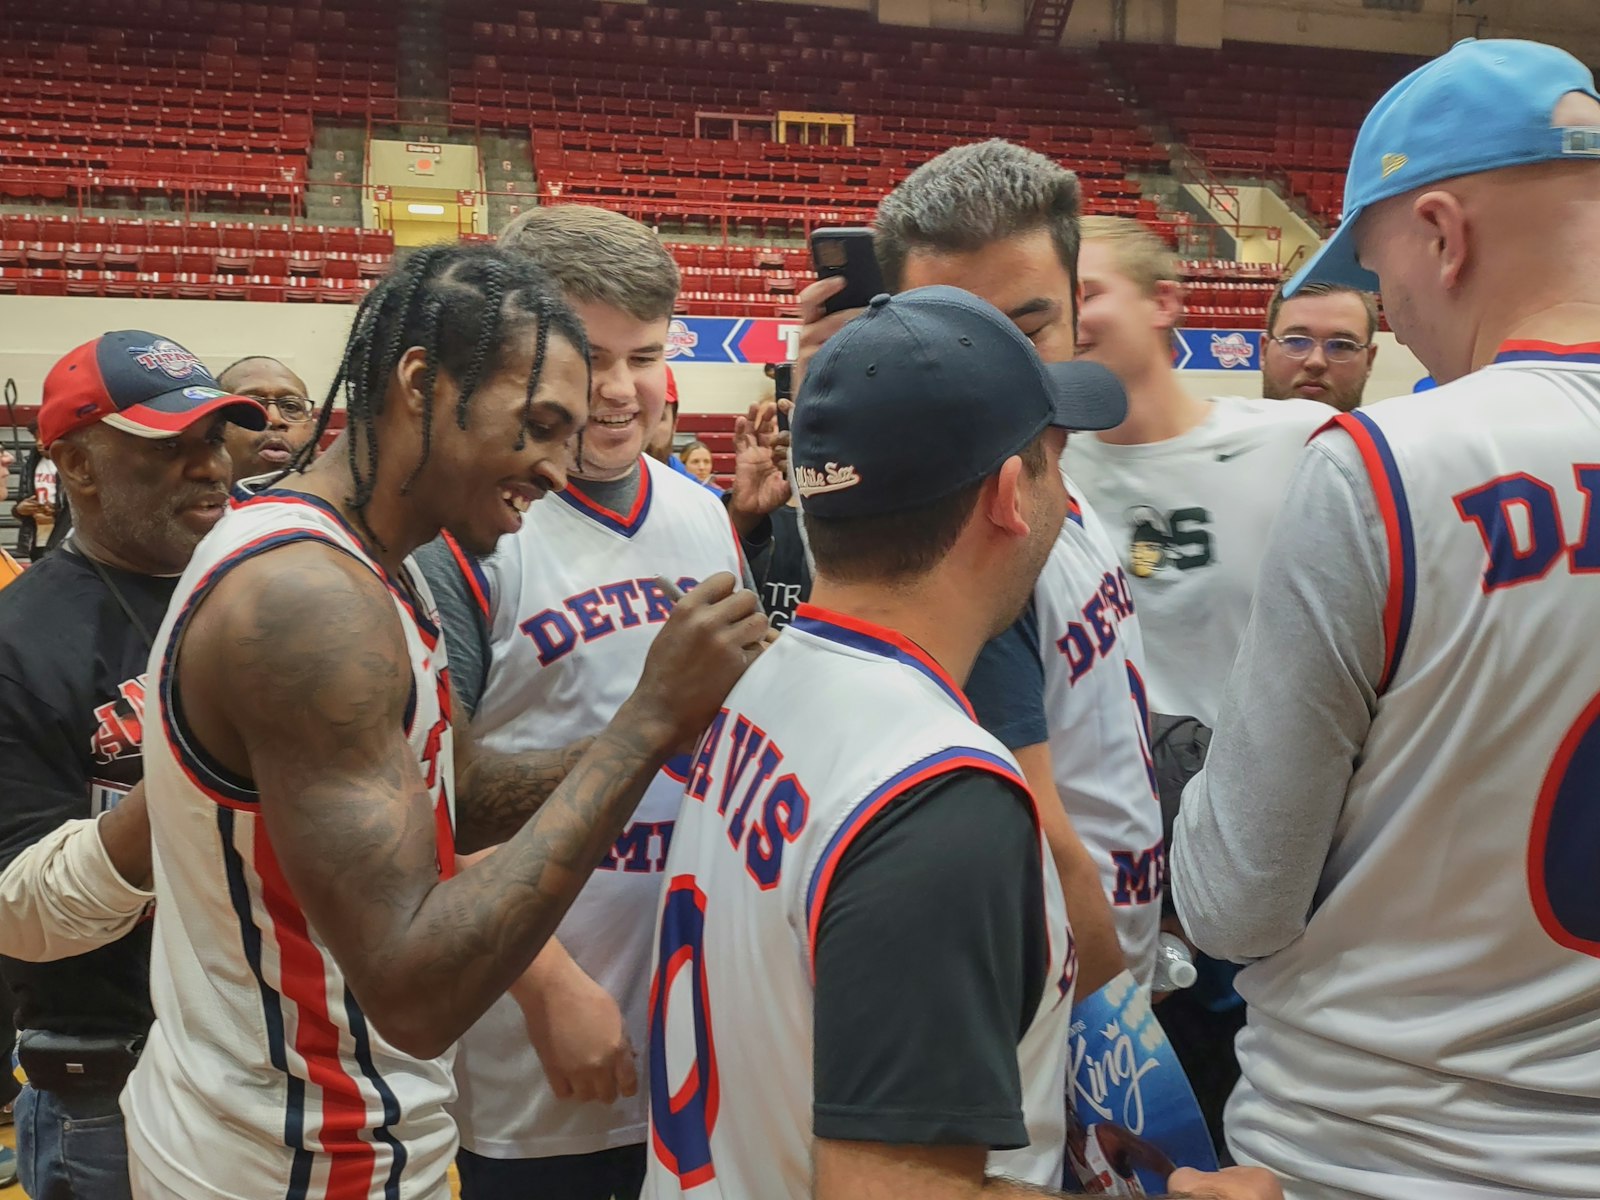 Following a 45-minute post-game ceremony in his honor, Antoine Davis signs autographs for a group of Detroit Mercy fans bearing replicas of his Titan basketball jersey. (Photo by Wright Wilson | Special to Detroit Catholic)